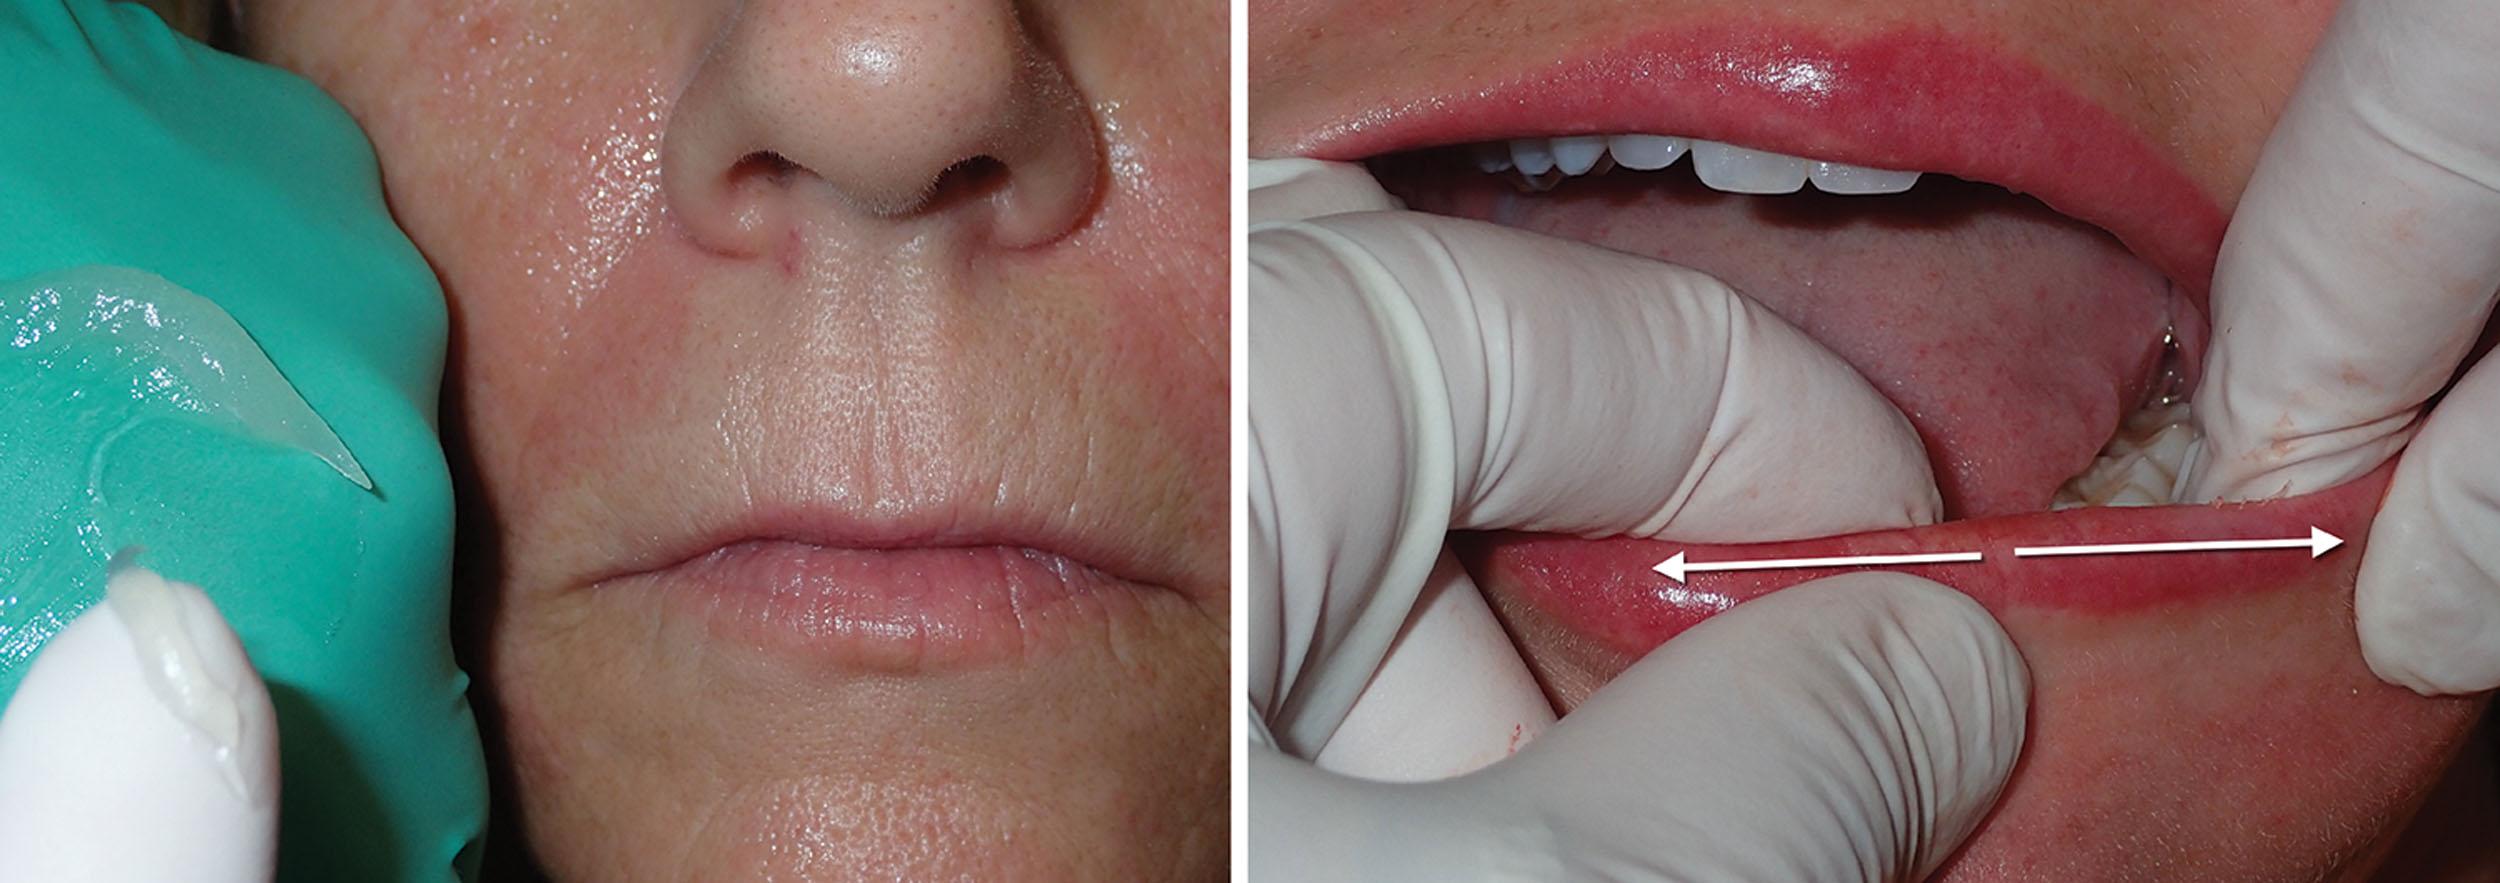 Fig. 10.22, Massage can be a very important part of filler treatment. Even in the best hands, filler can be injected in a manner that produces irregularities that can be seen or felt. By gently lubricating and massaging the lips, these gel fillers are easily homogenized into a smoother and contiguous result. The lip is lubricated with petroleum jelly, and the injected area is gently drawn across the injection area.